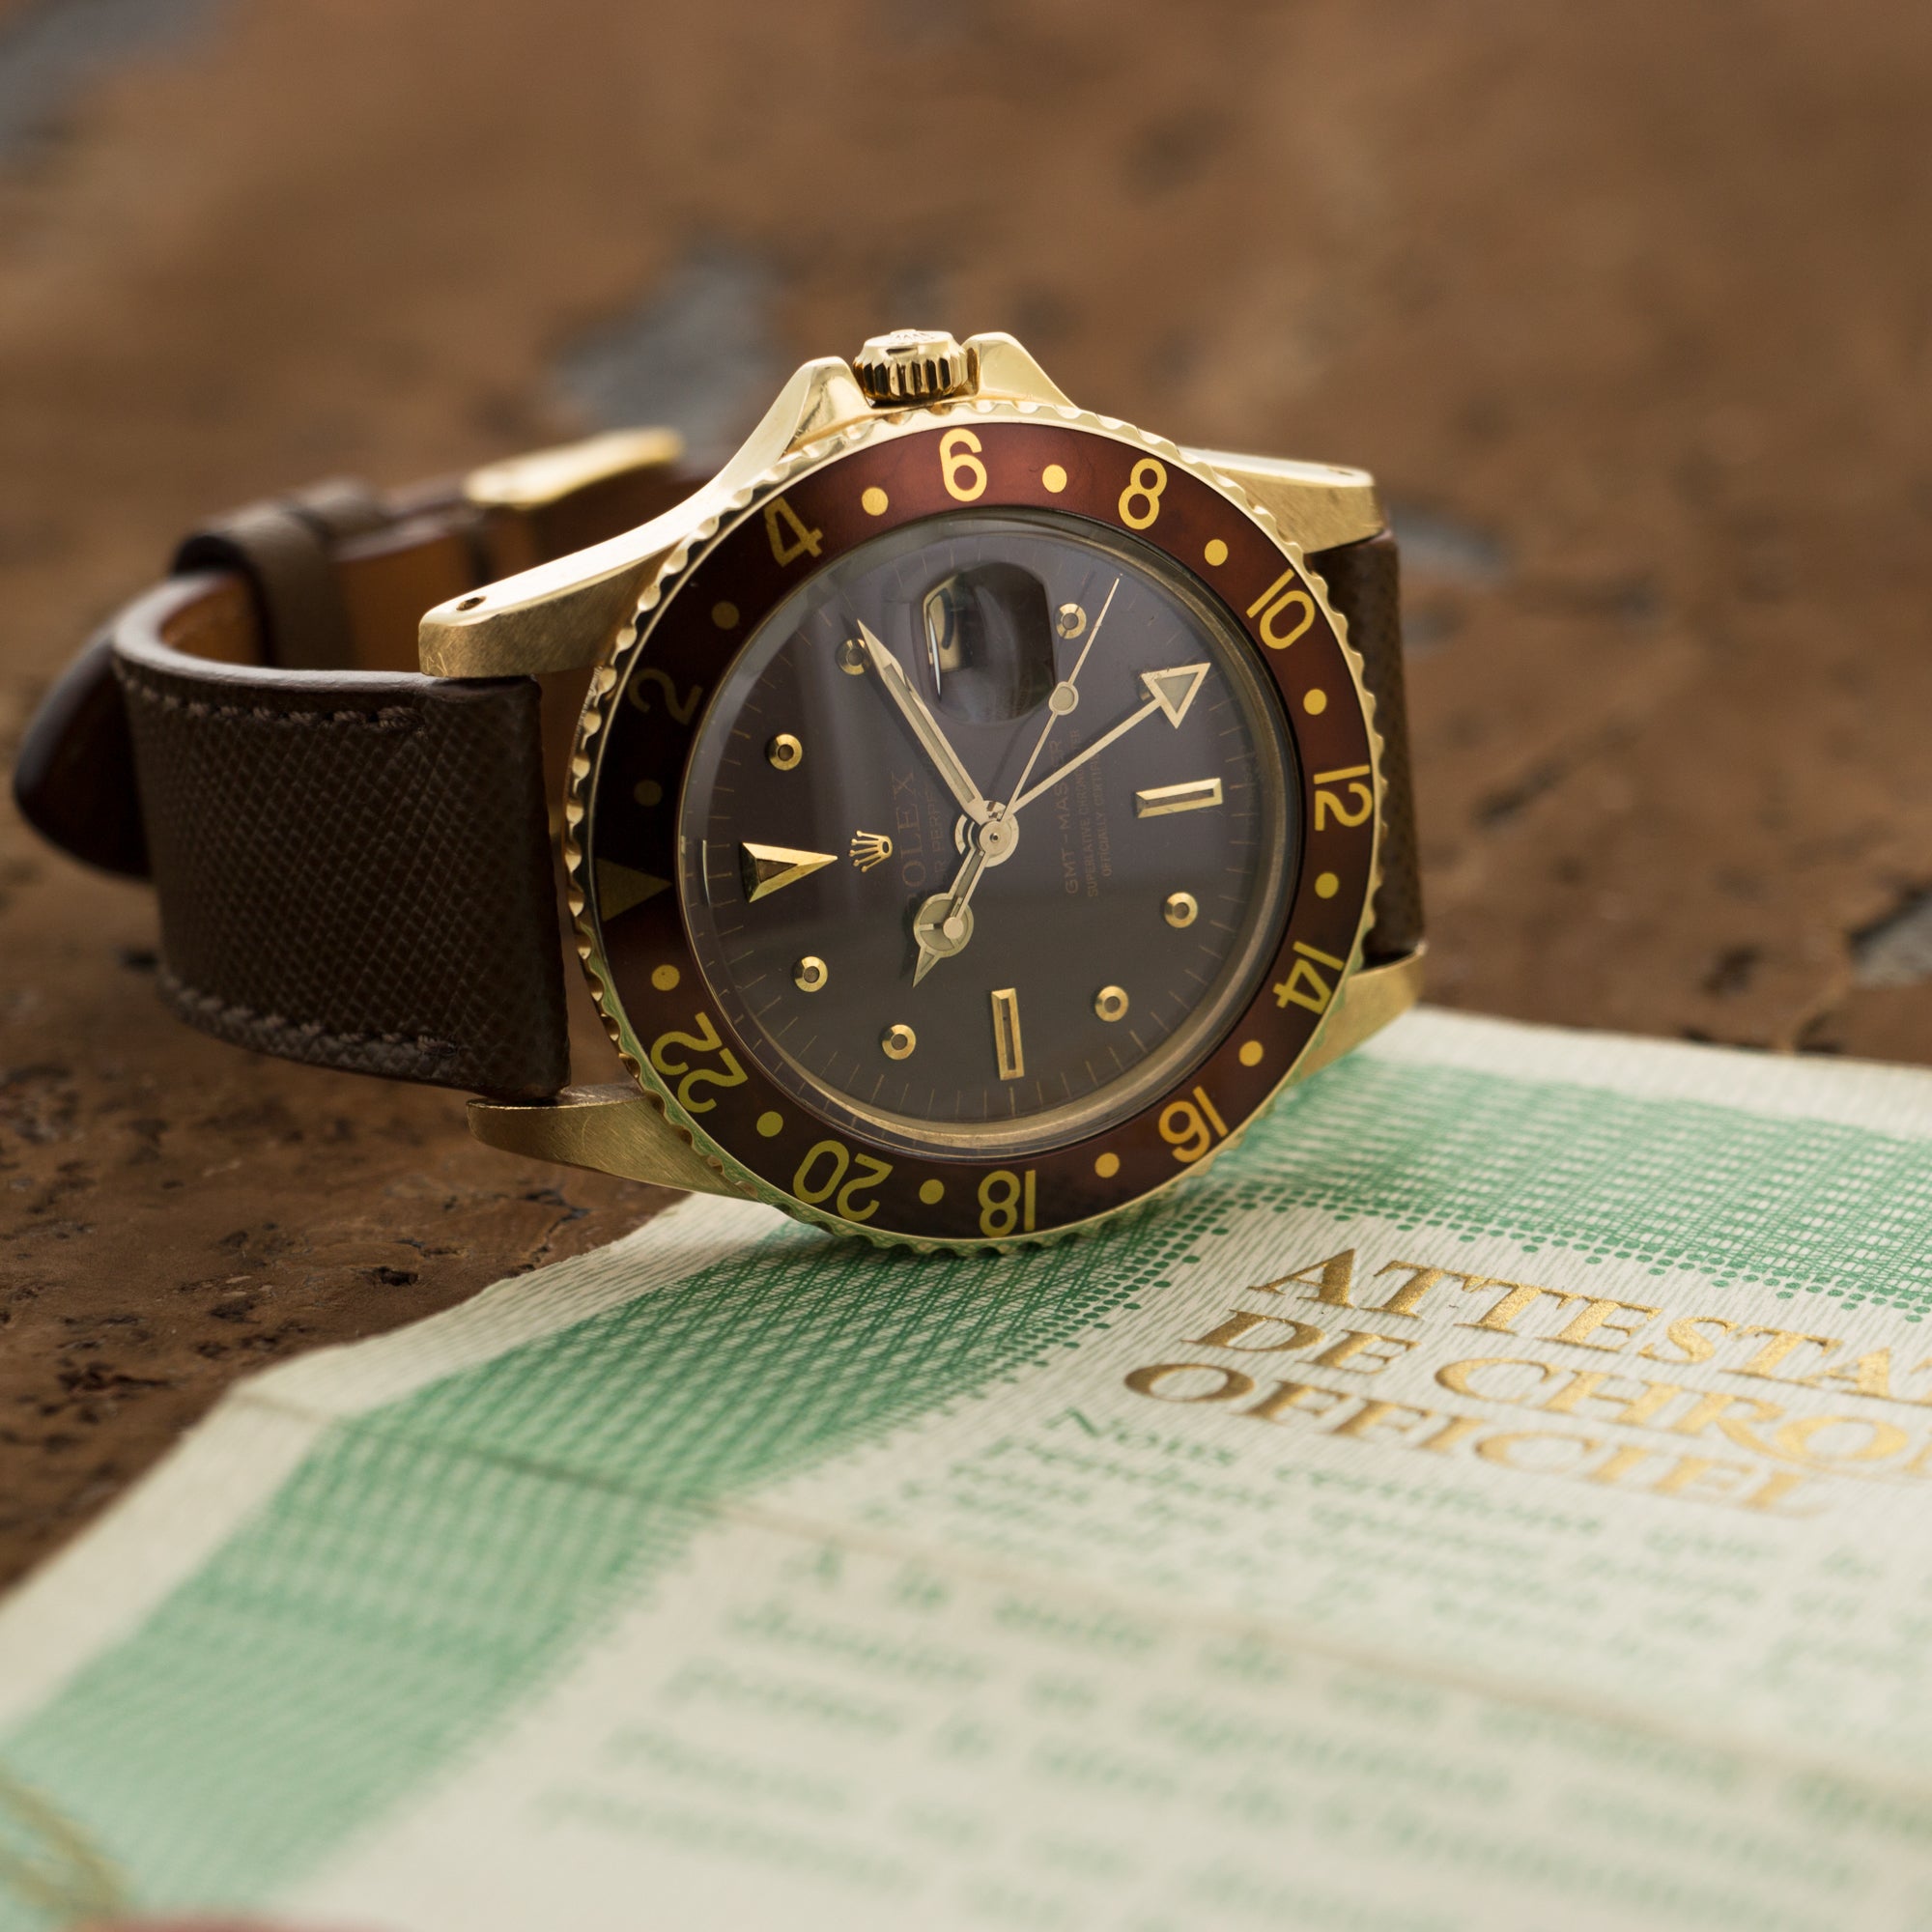 Rolex - Vintage Rolex Root Beer GMT-Master Gold Brown Ref. 1675 with Paper - The Keystone Watches